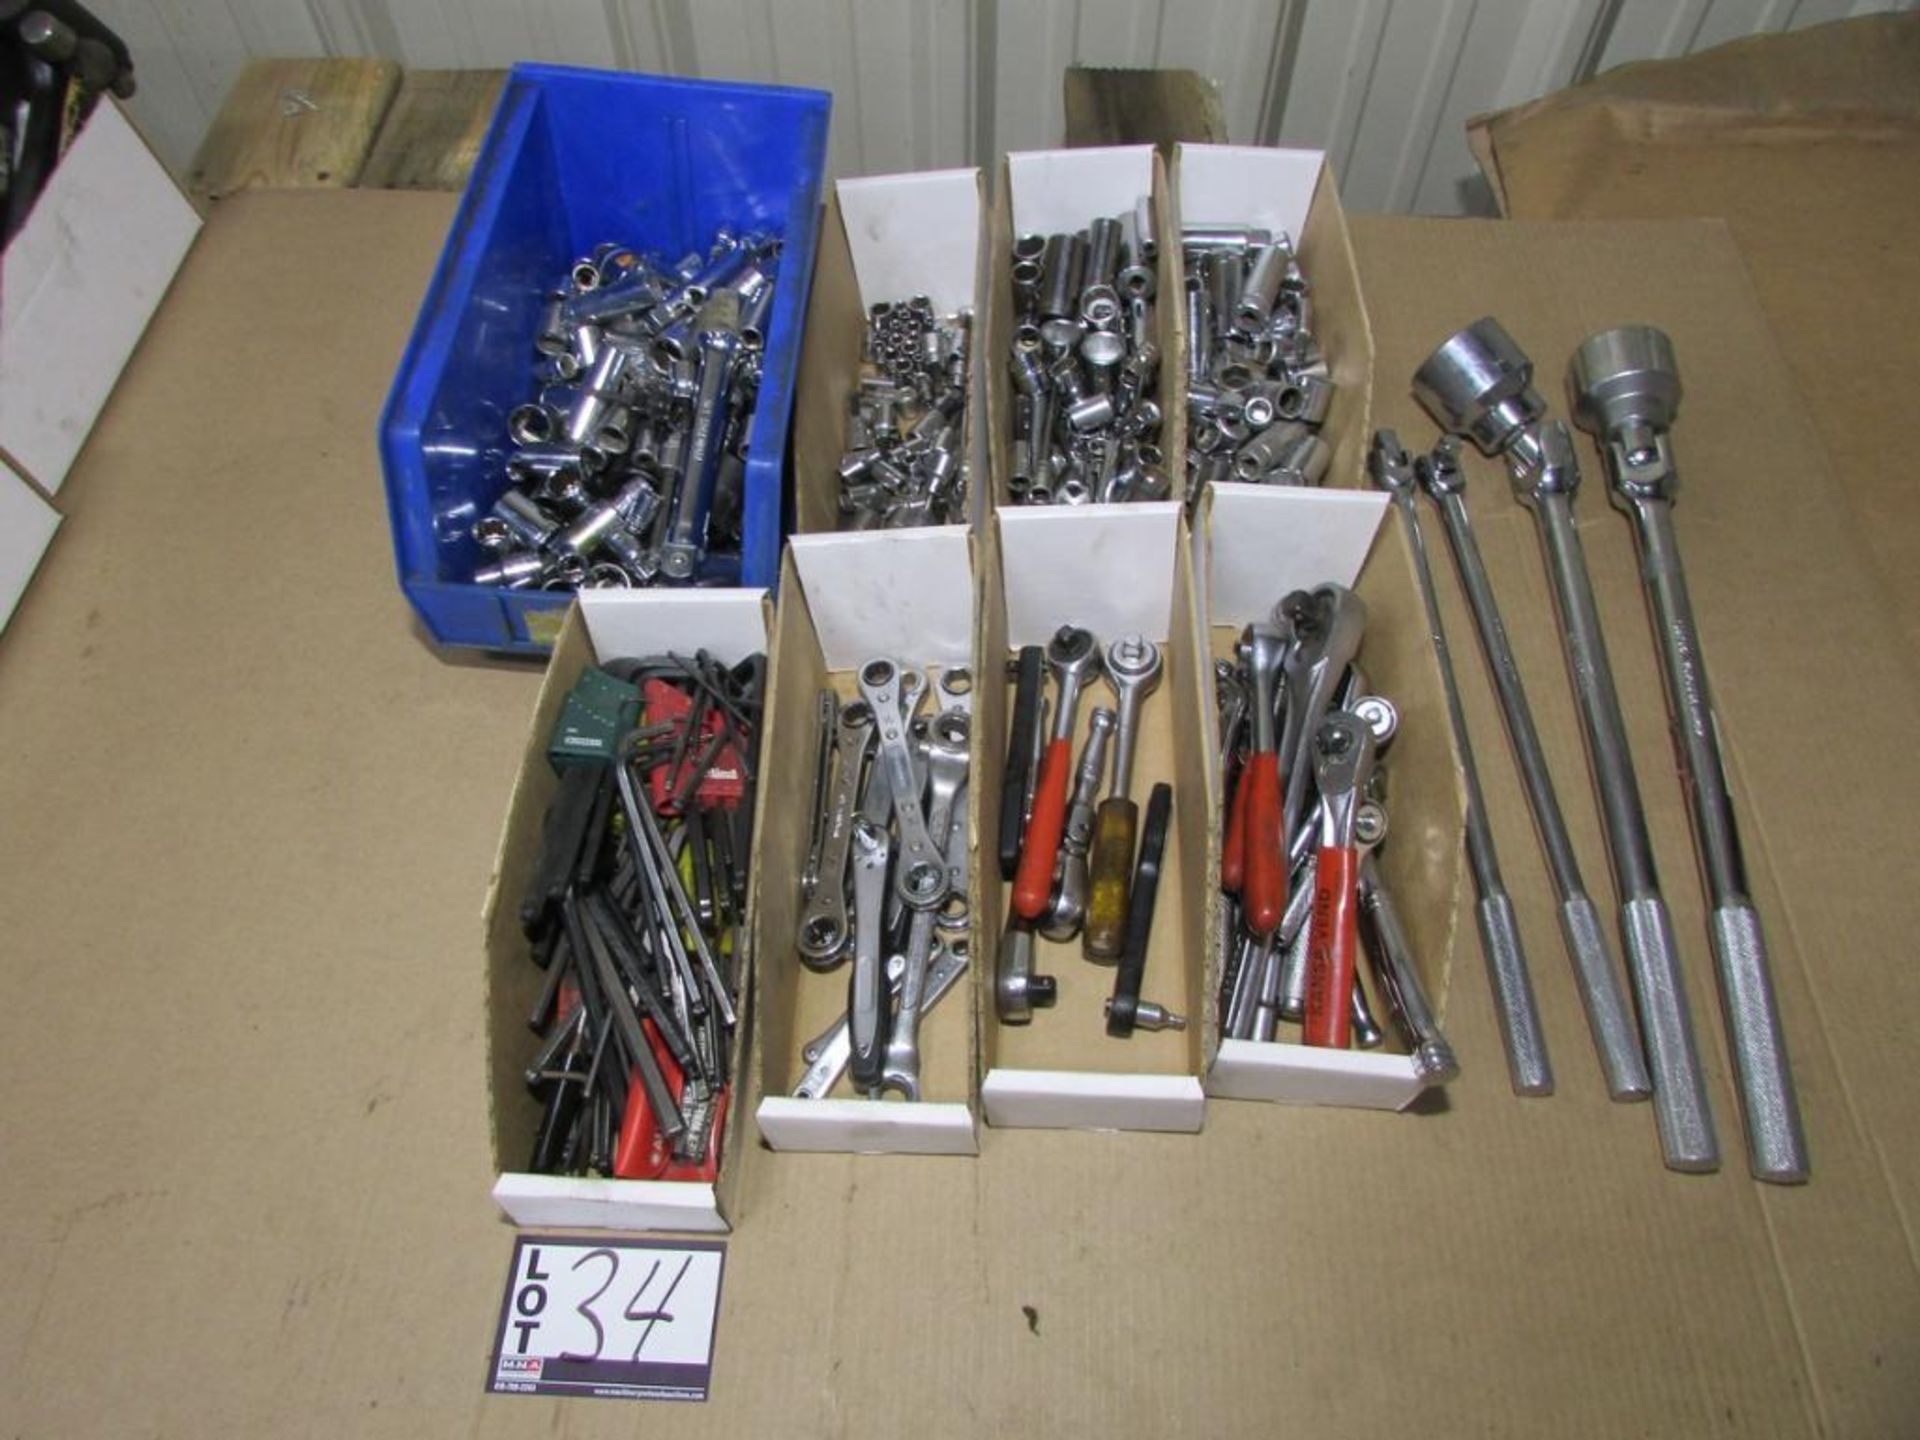 Assorted Allen Wrenches, Drivers, Pliers, Hammers, and Wrenches